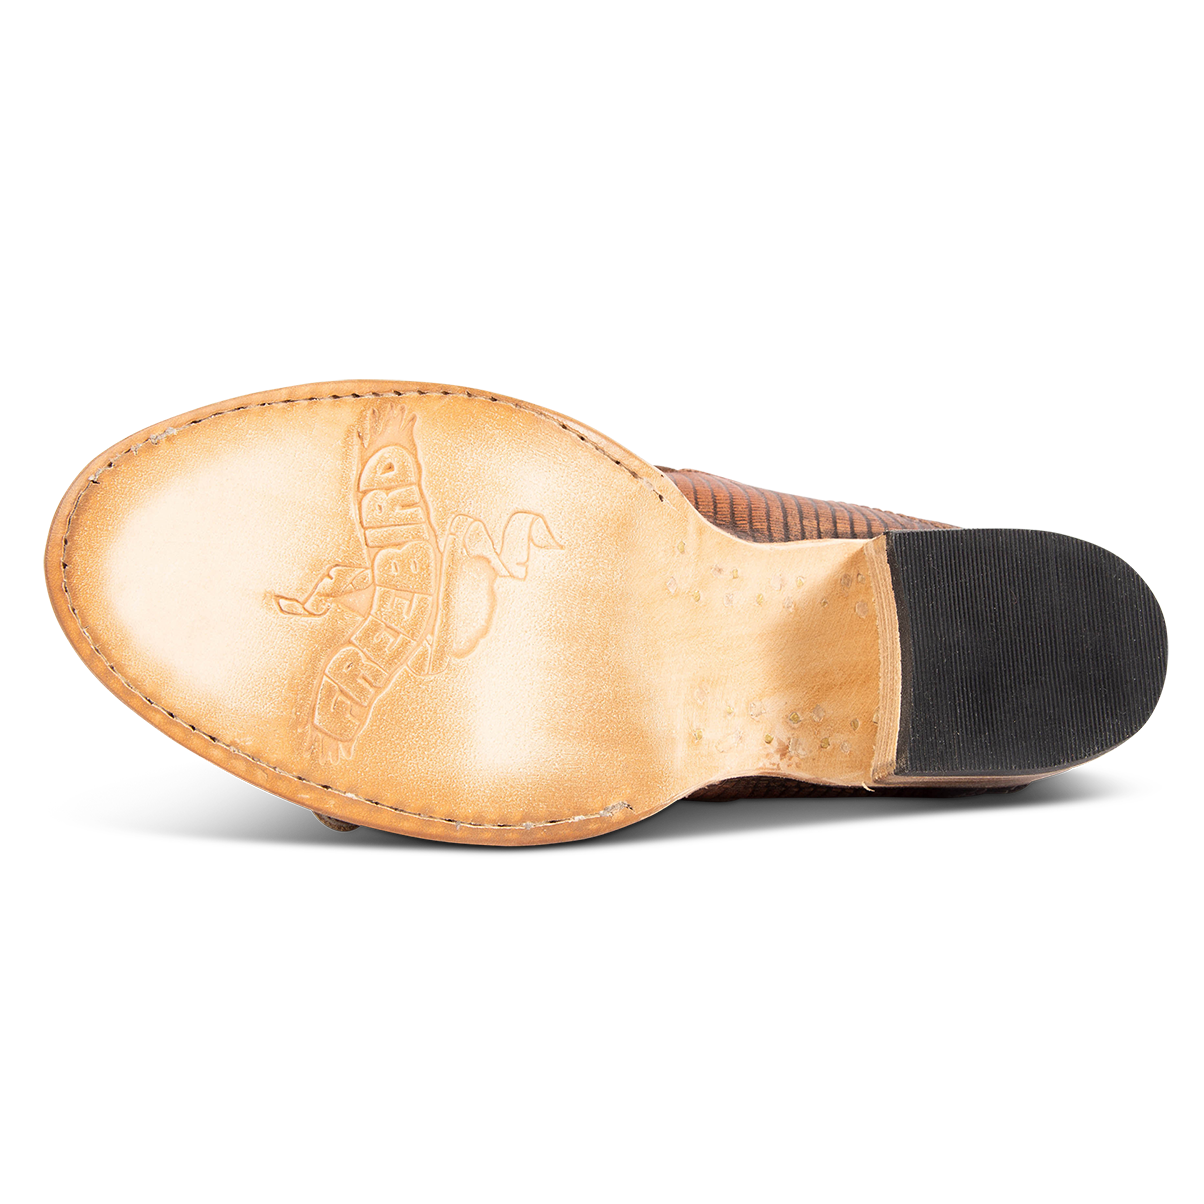 Leather sole imprinted with FREEBIRD on women's Caprice copper sandal